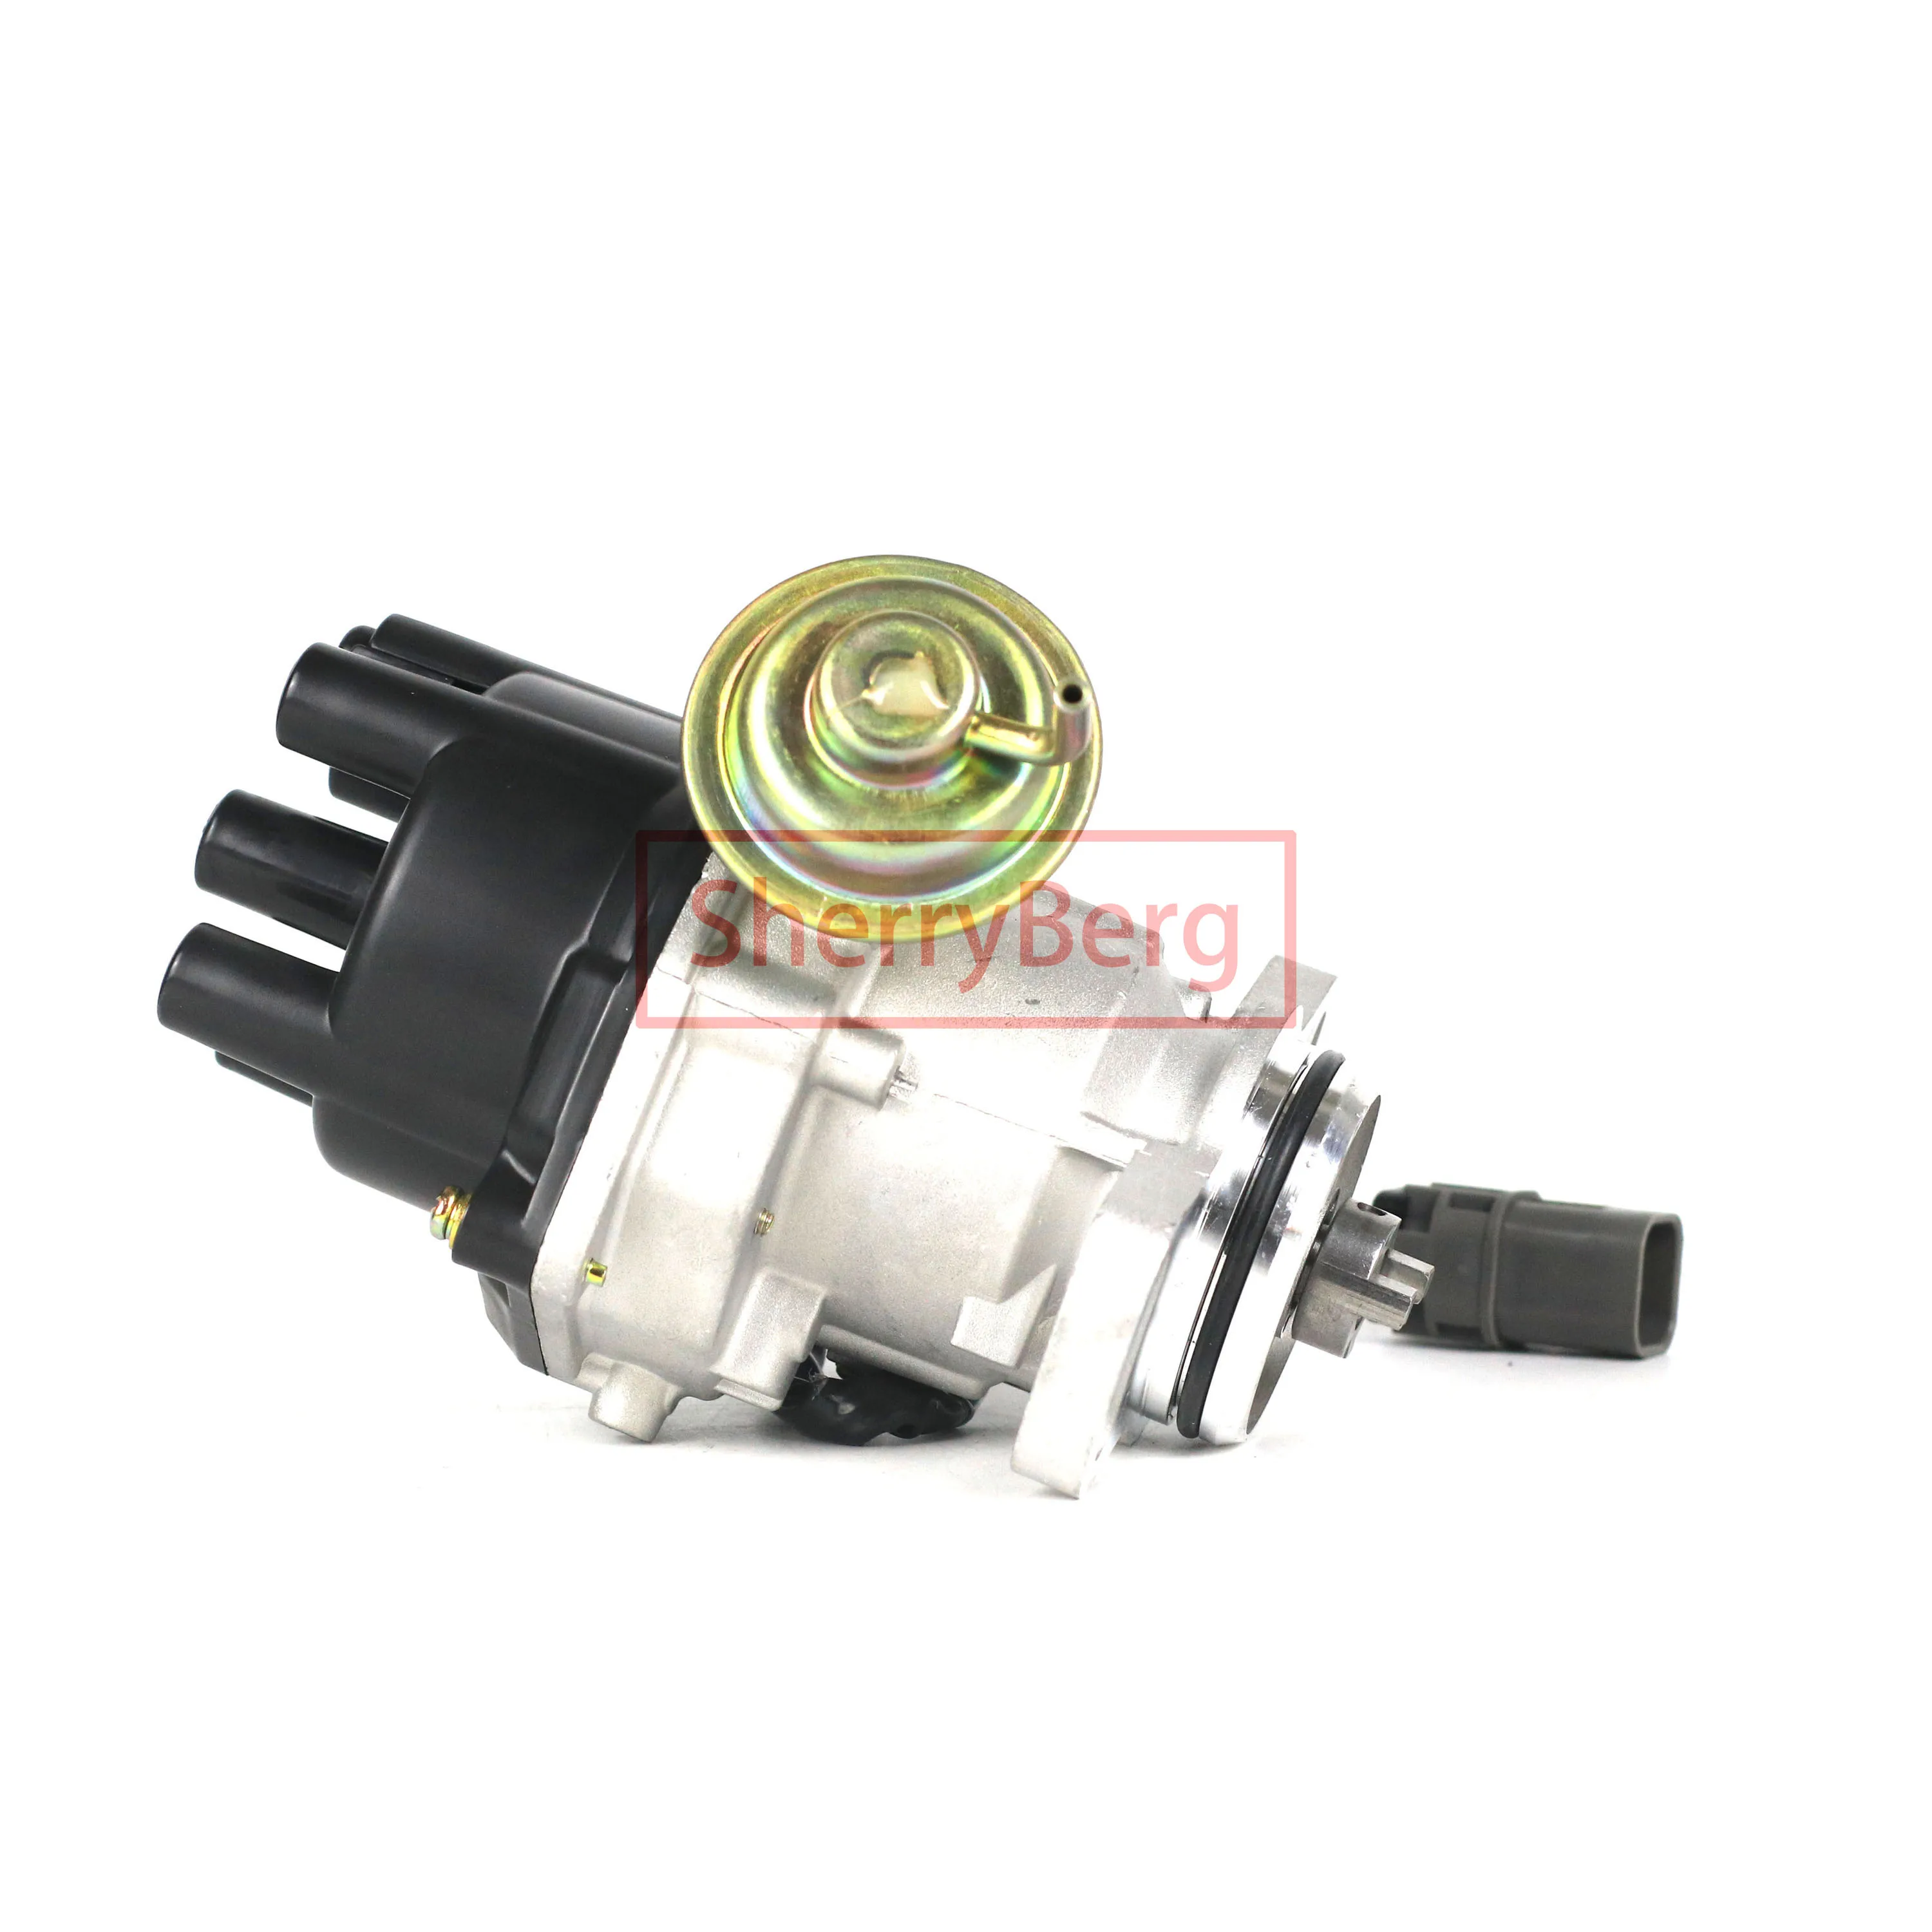 SherryBerg Complete Distributor fit for Nissan Sentra 1.6 GA16 Carb Models Distributor with Vacuum OE 22100-80N00 22100-74Y05